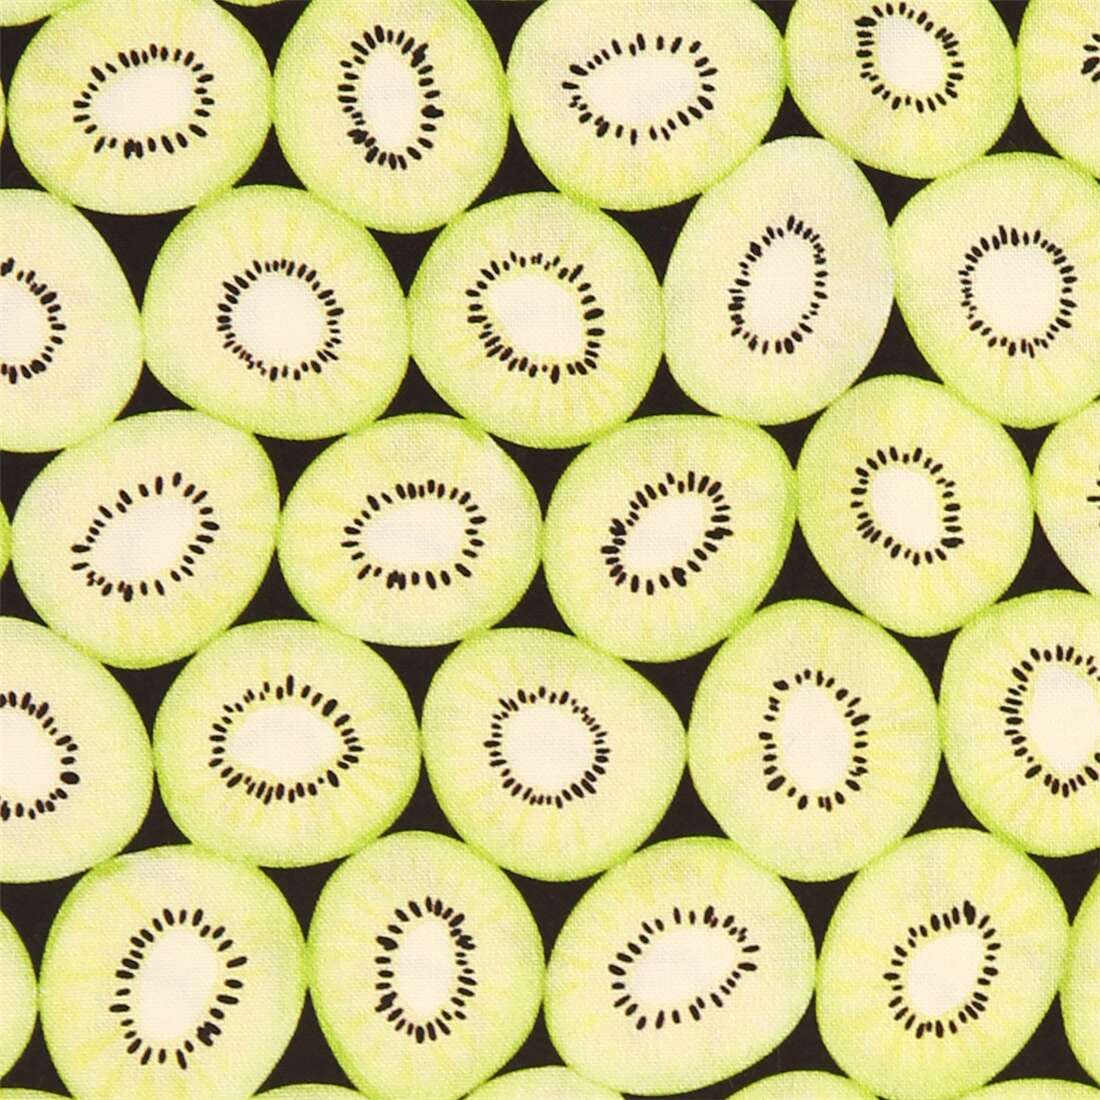 Michael Miller black cotton fabric with green kiwi fruit slices